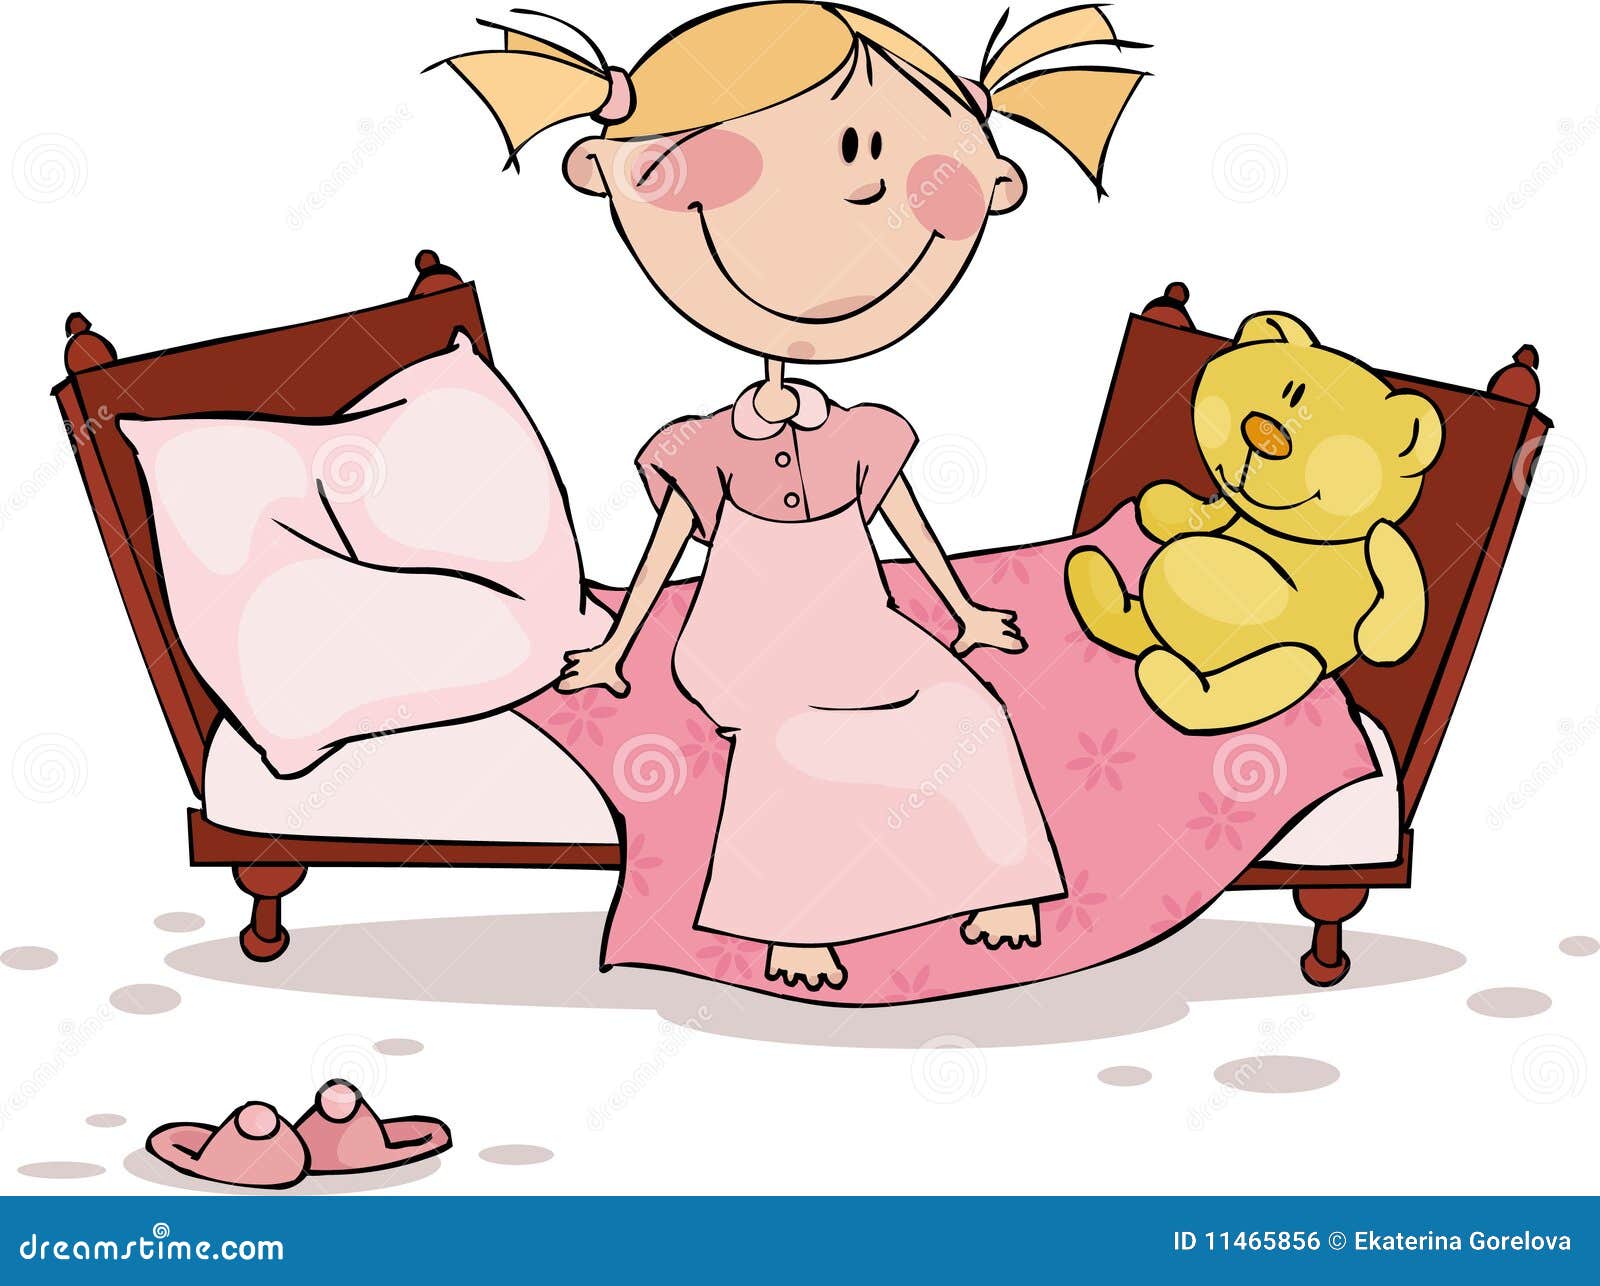 good night clipart free download - photo #32